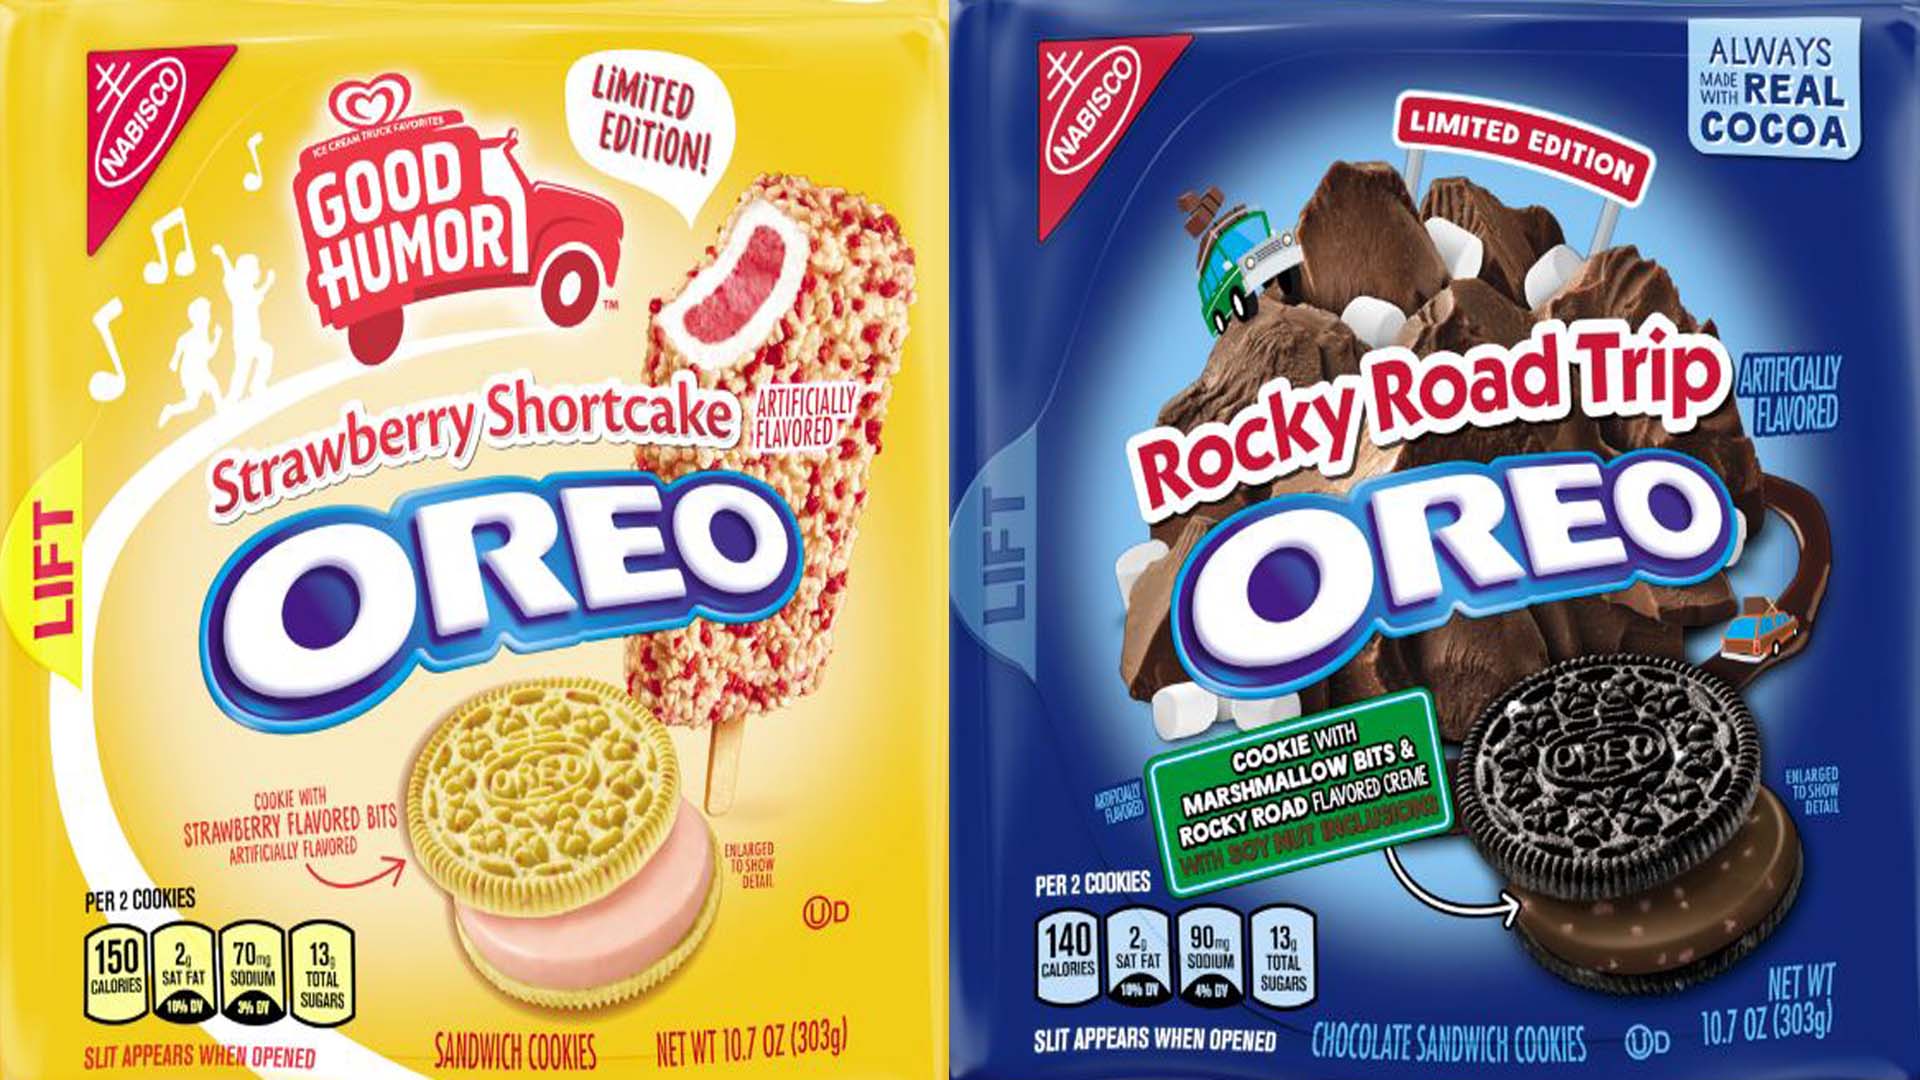 OREO announces new sweet treats just in time for National Ice Cream Day